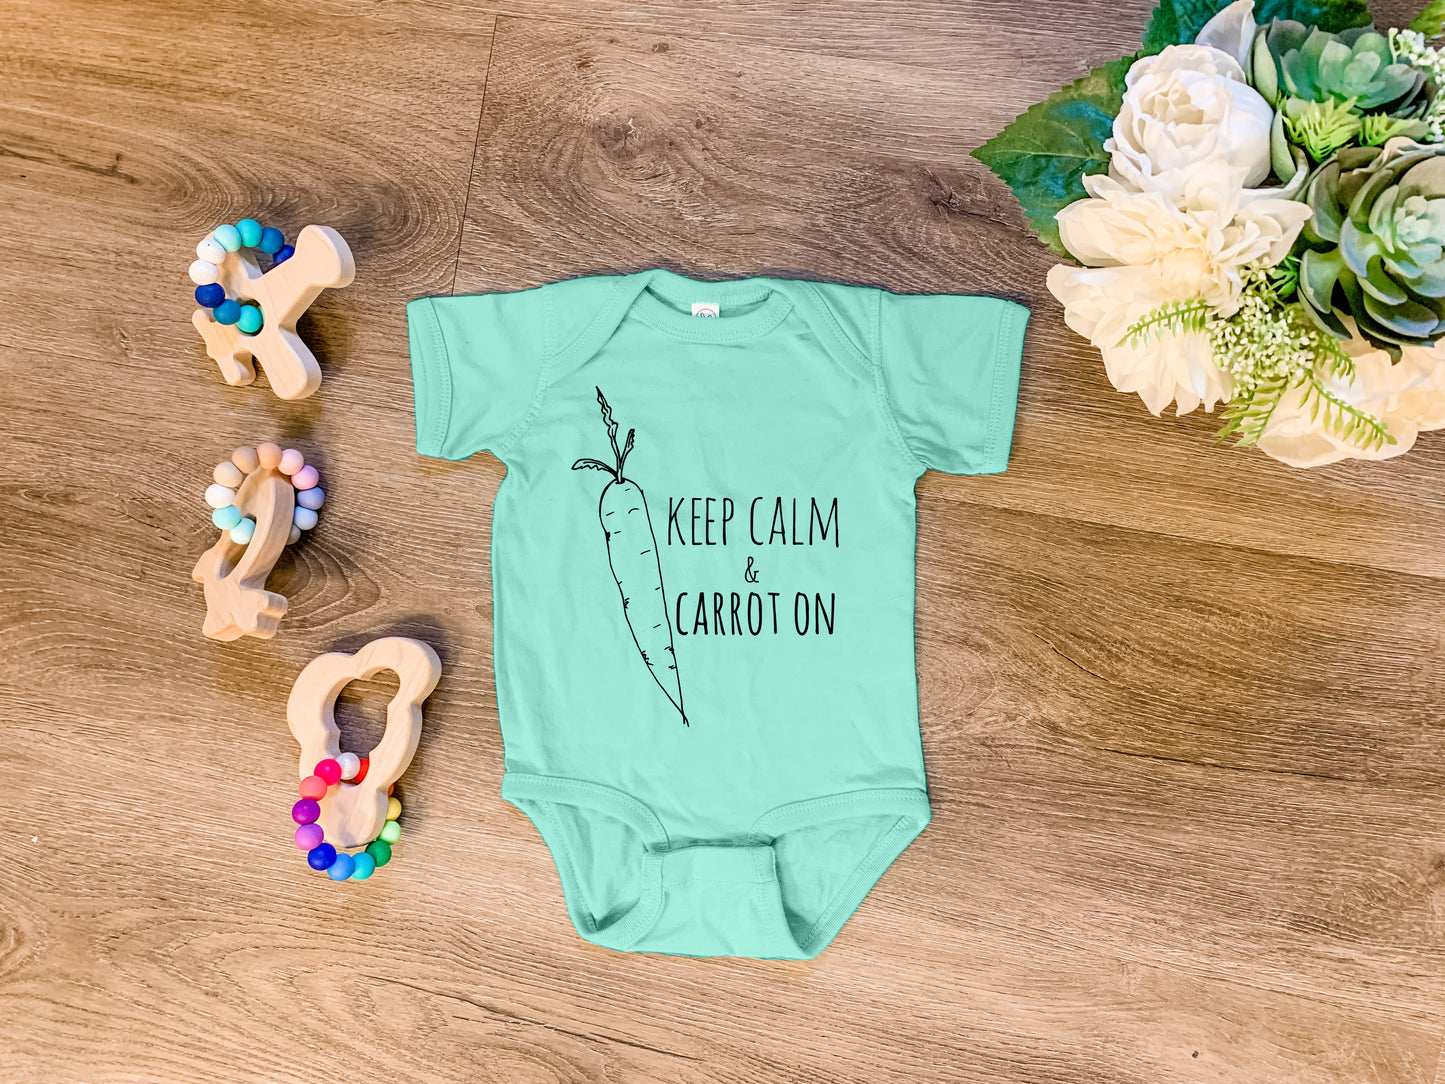 Keep Calm and Carrot On - Onesie - Heather Gray, Chill, or Lavender